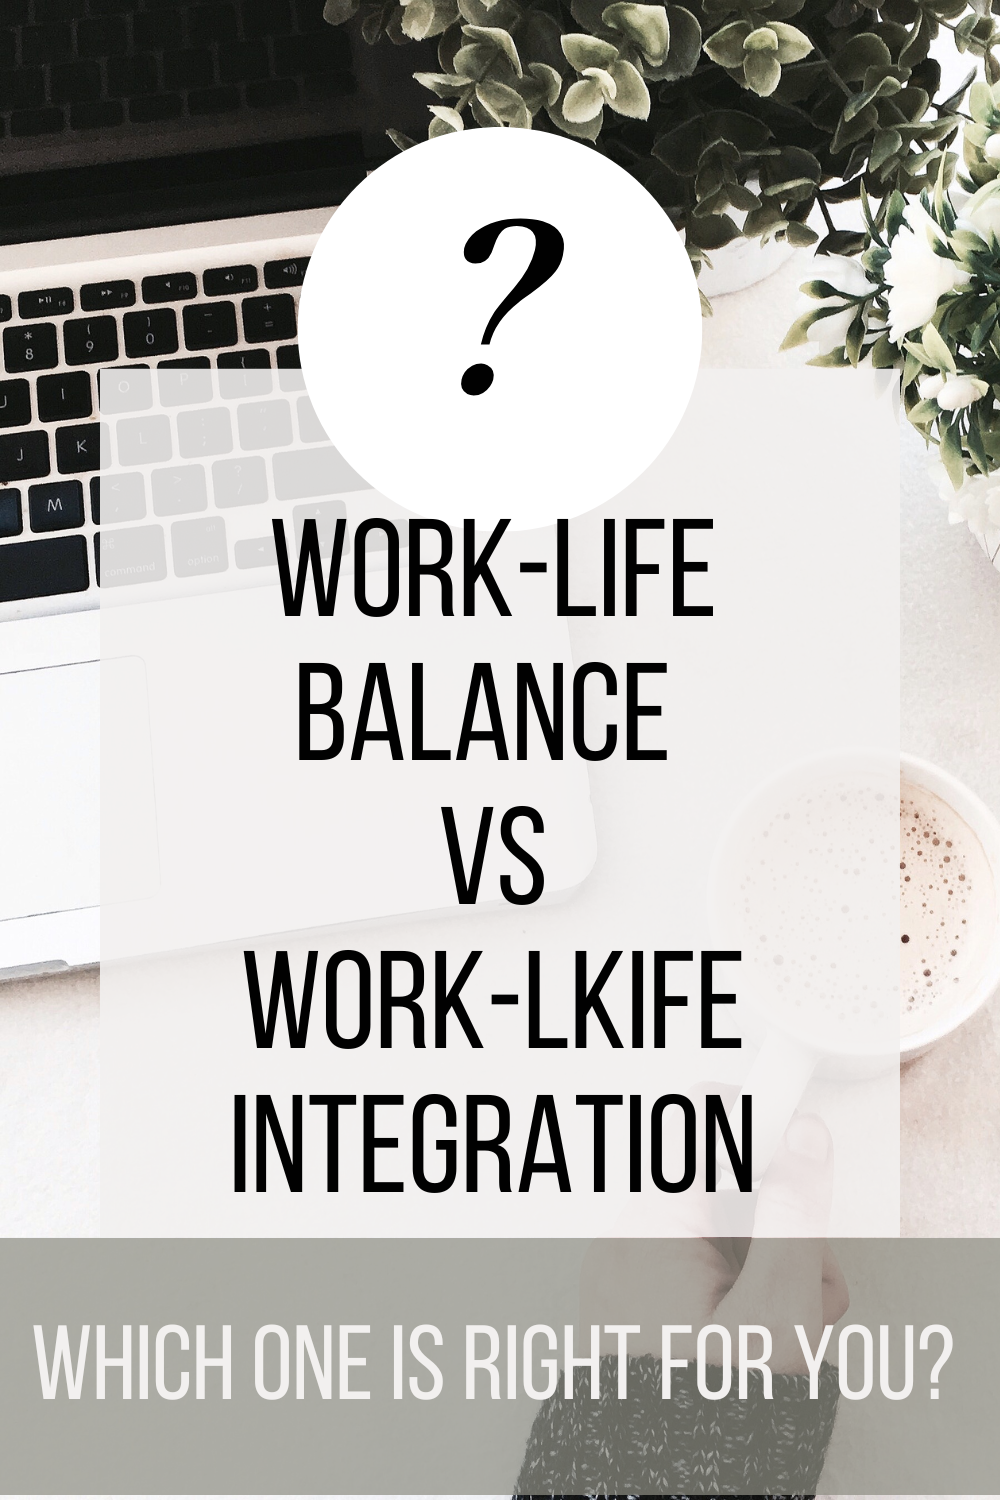 Work-Life Balance vs. Work-Life Integration: Which is the Right Fit for You?